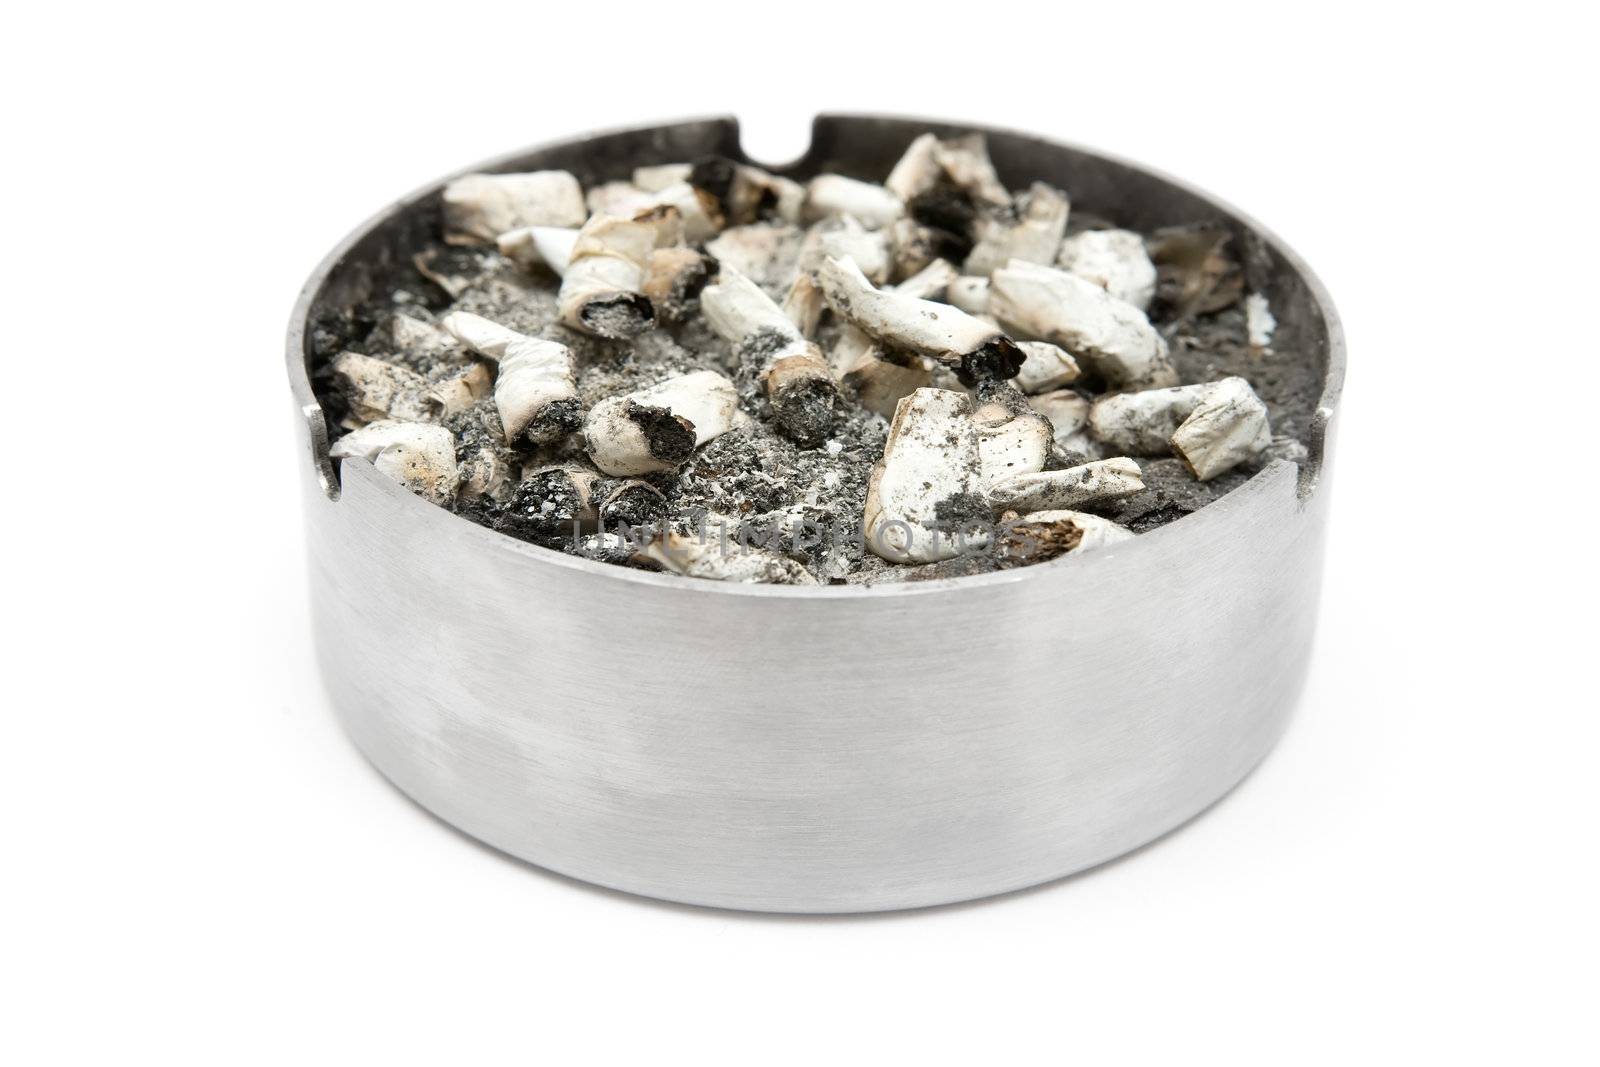 Overfilled ashtray isolated on a white background.